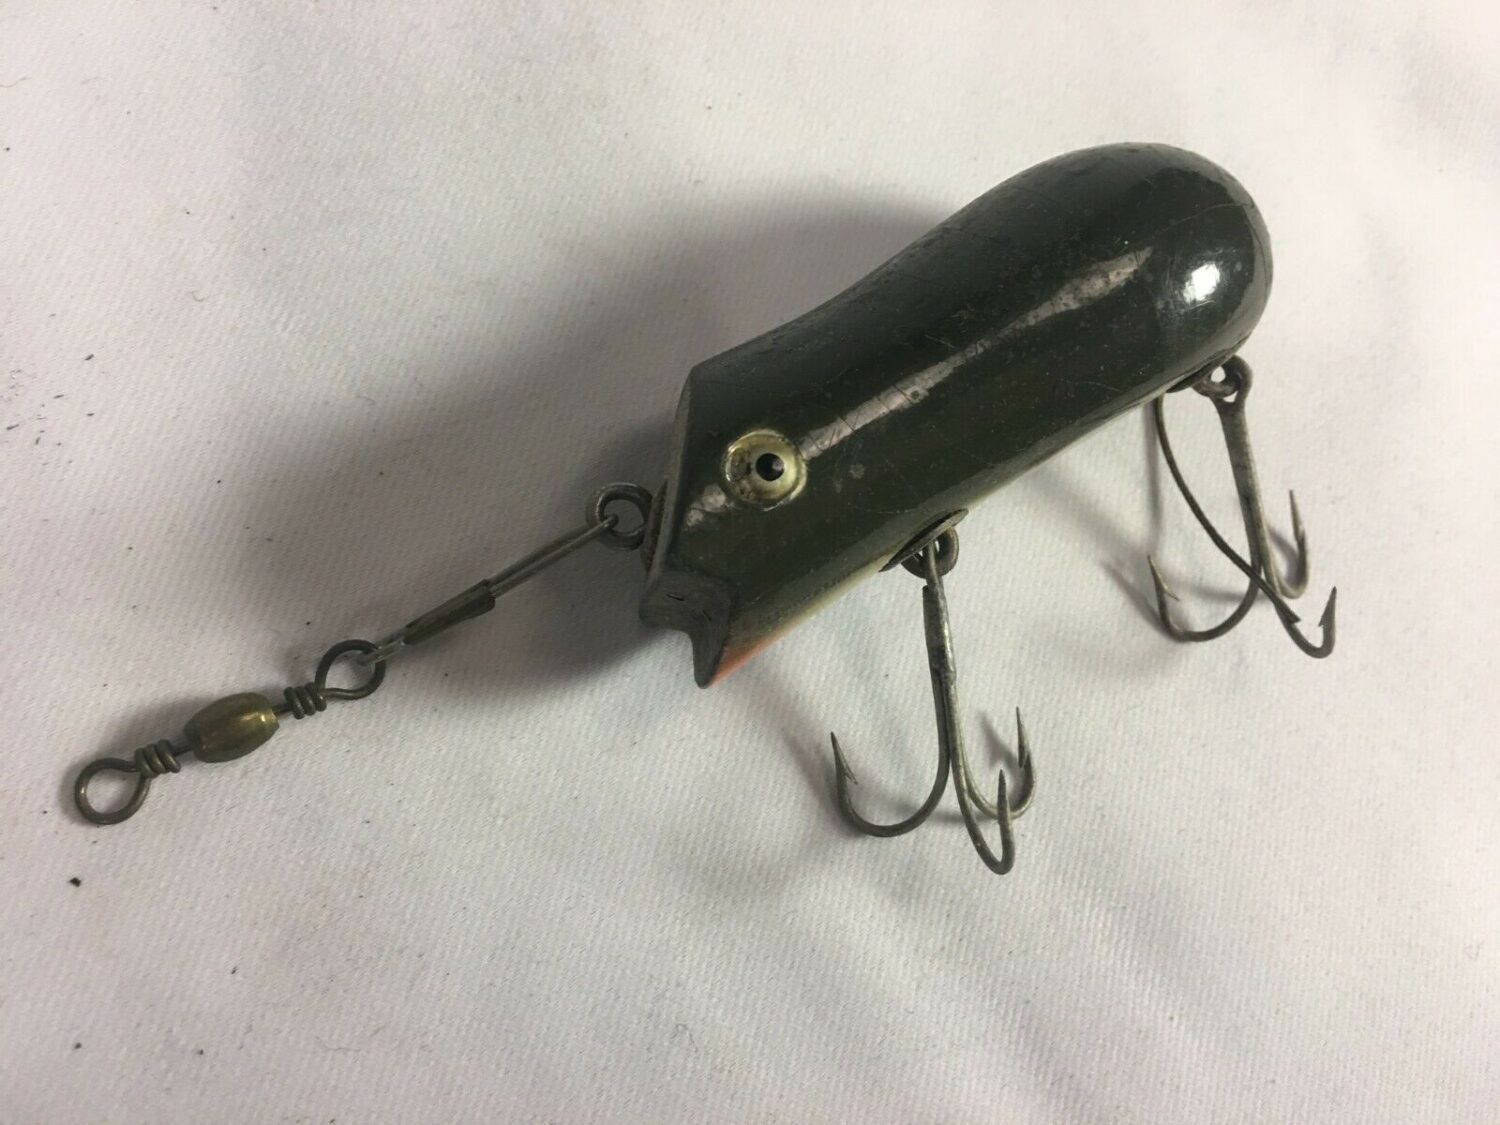 Joe's Old Lures - Books About Collecting Antique Fishing Lures & Tackle